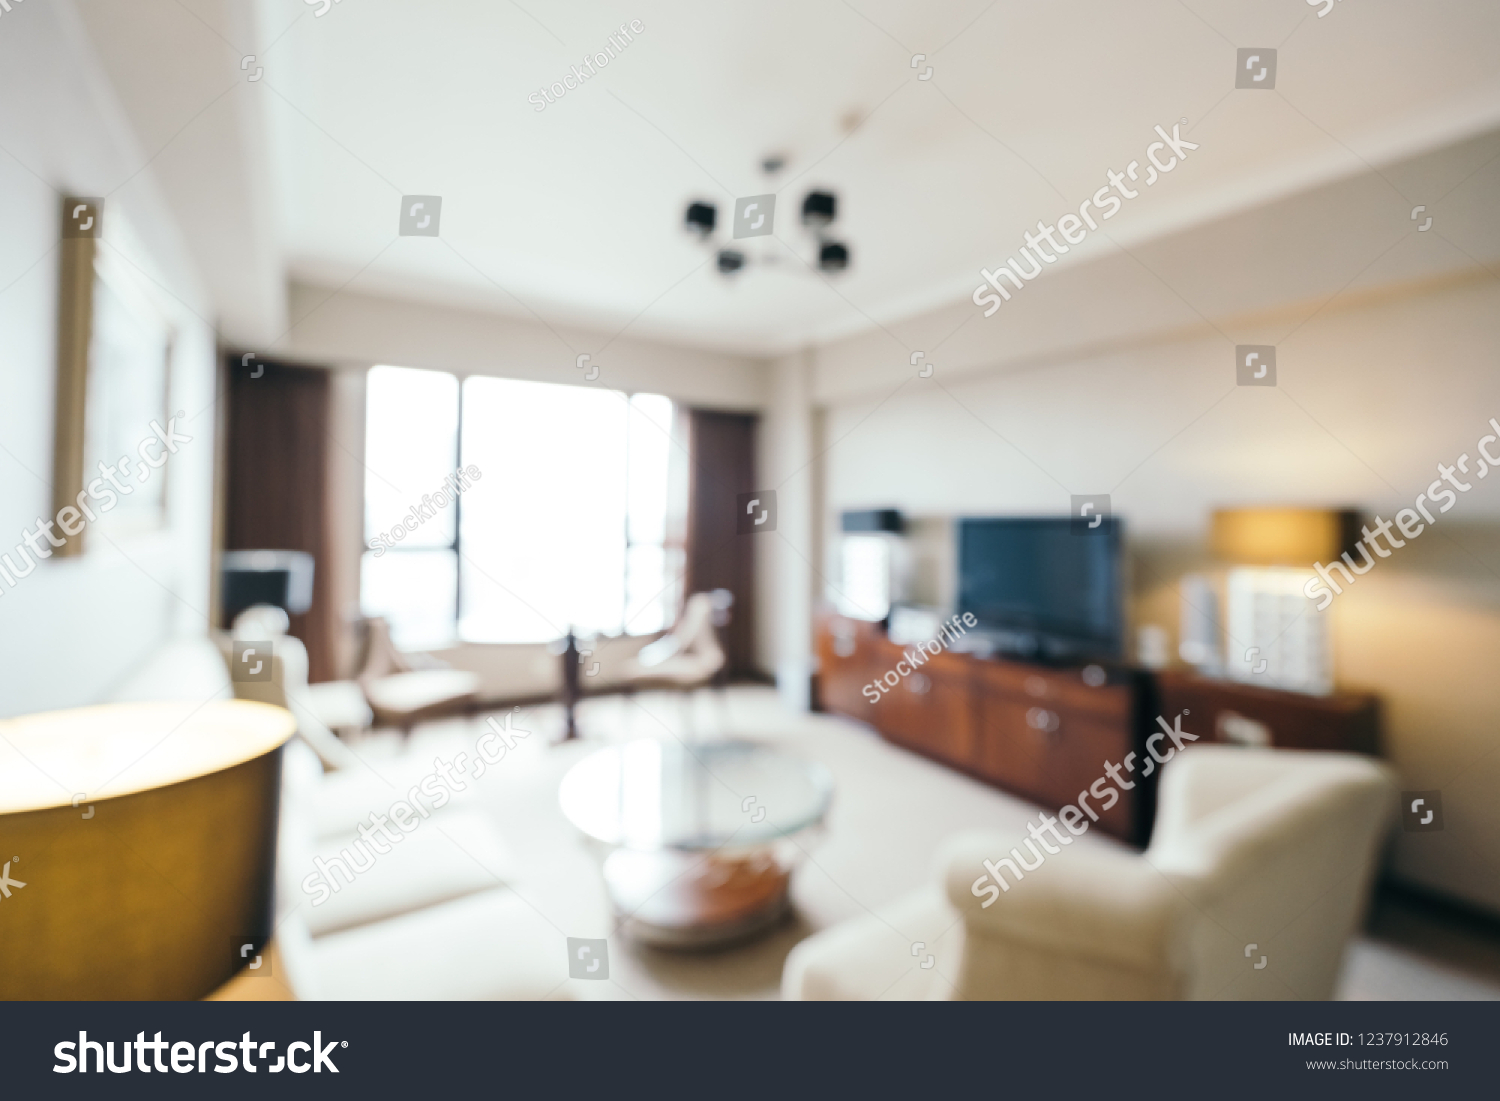 Abstract blur and defocused living room interior for background #1237912846